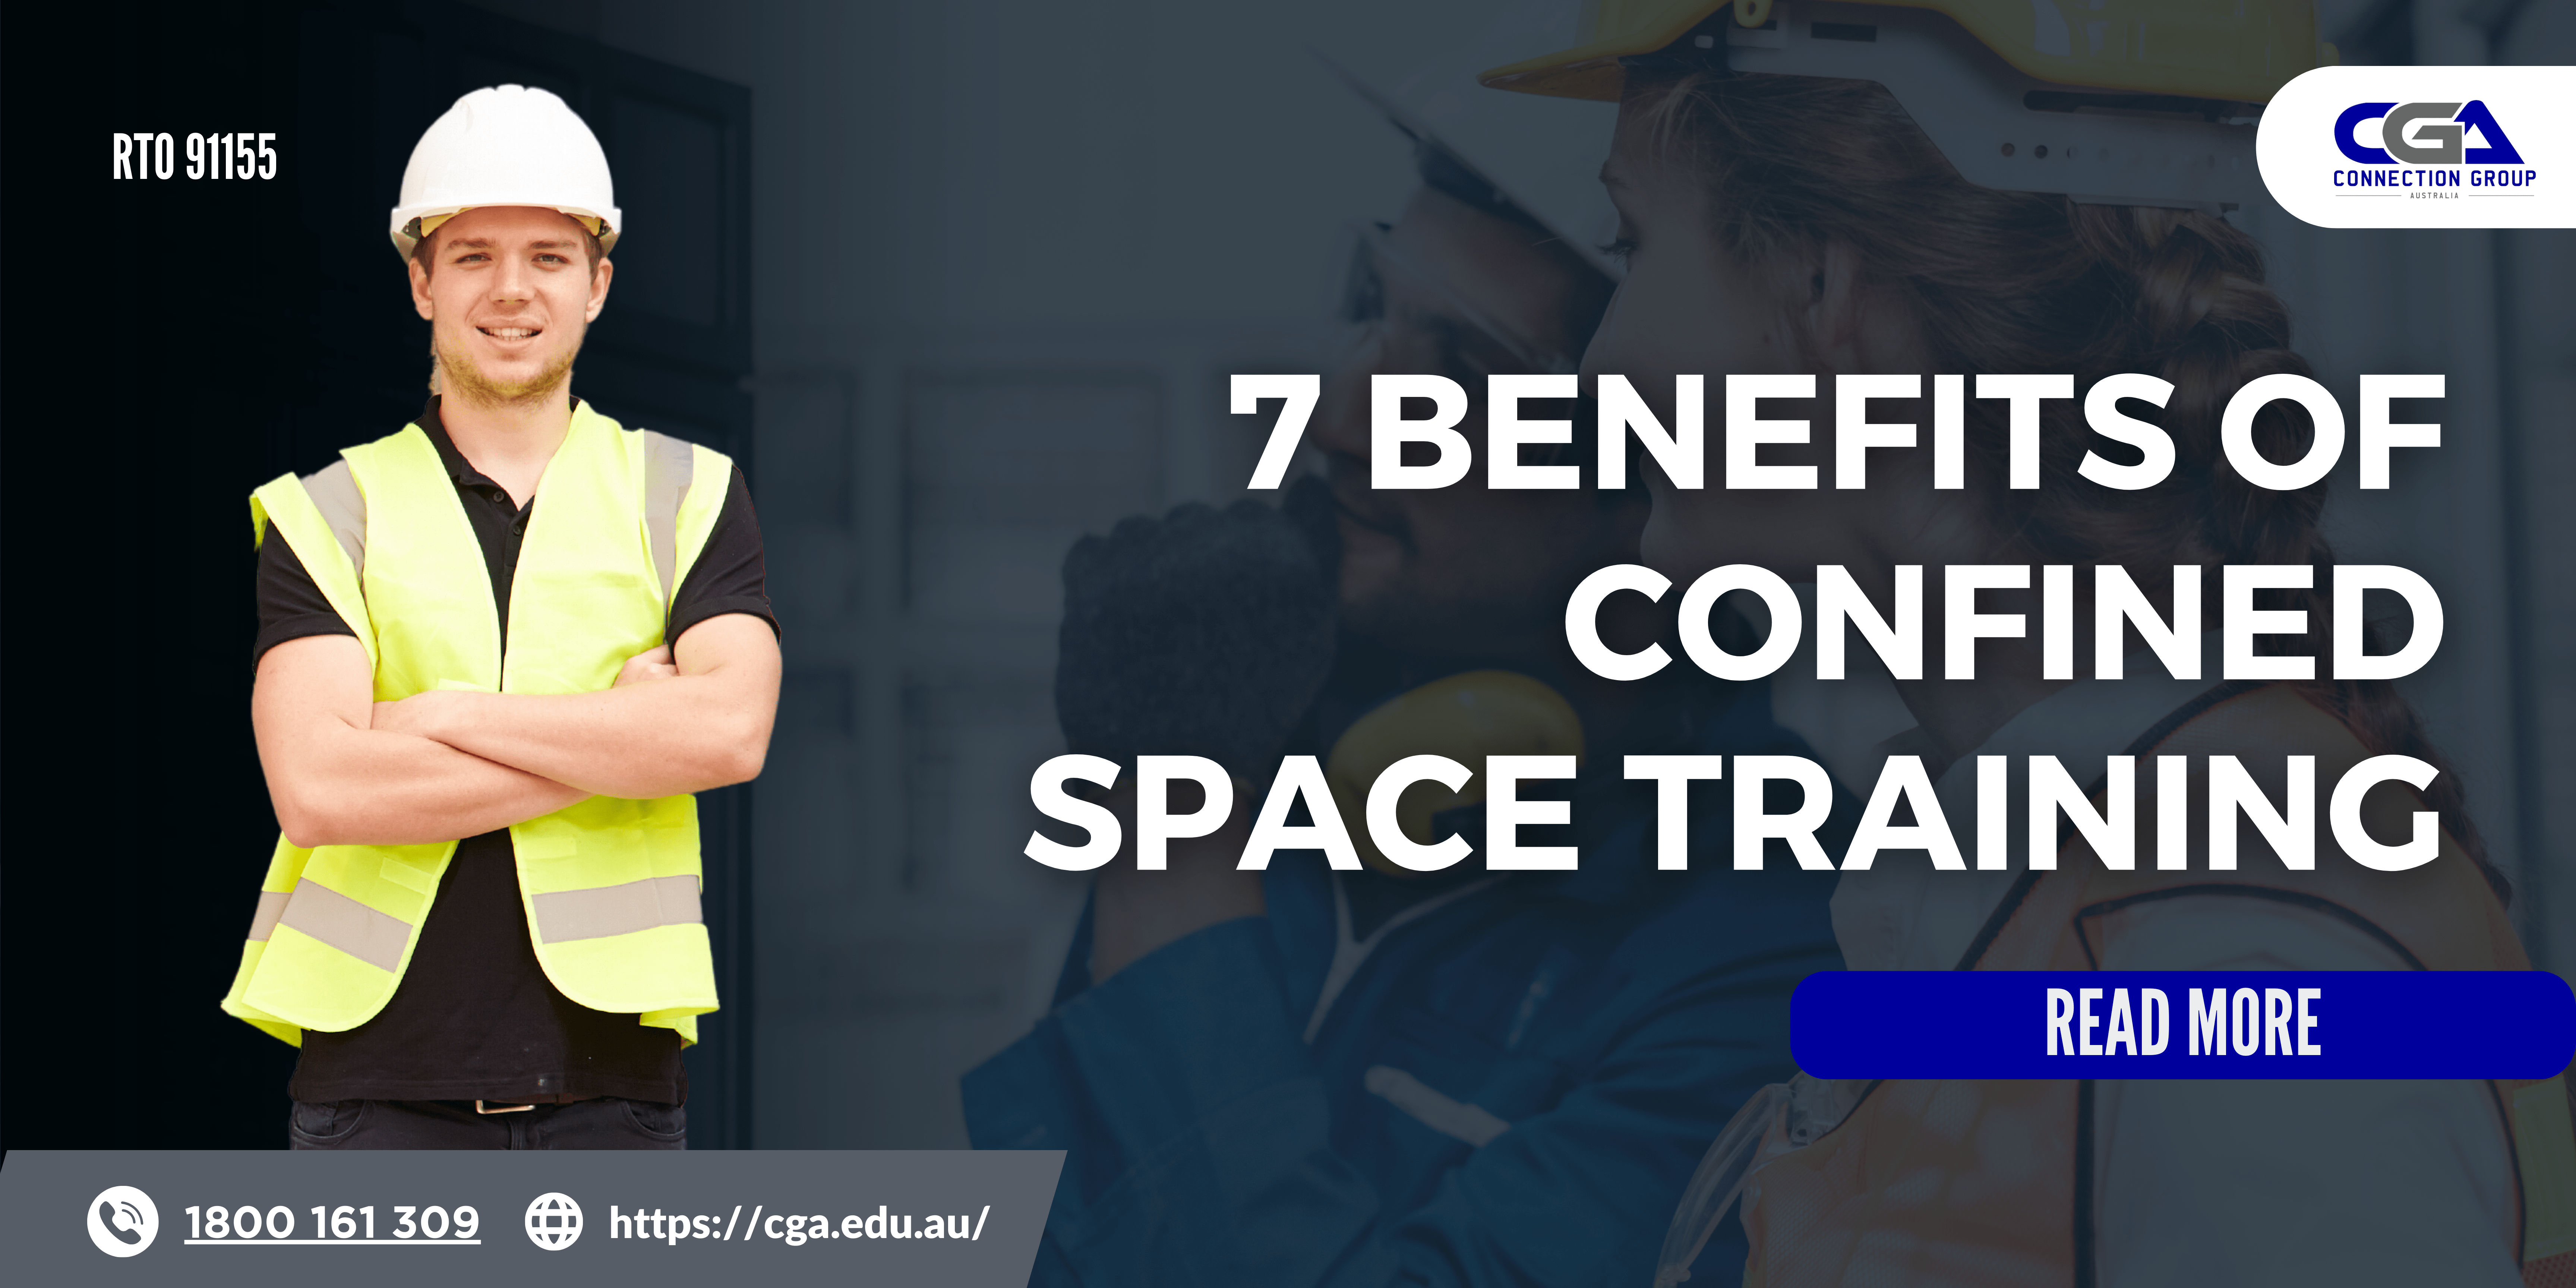 The benefits of confined space training